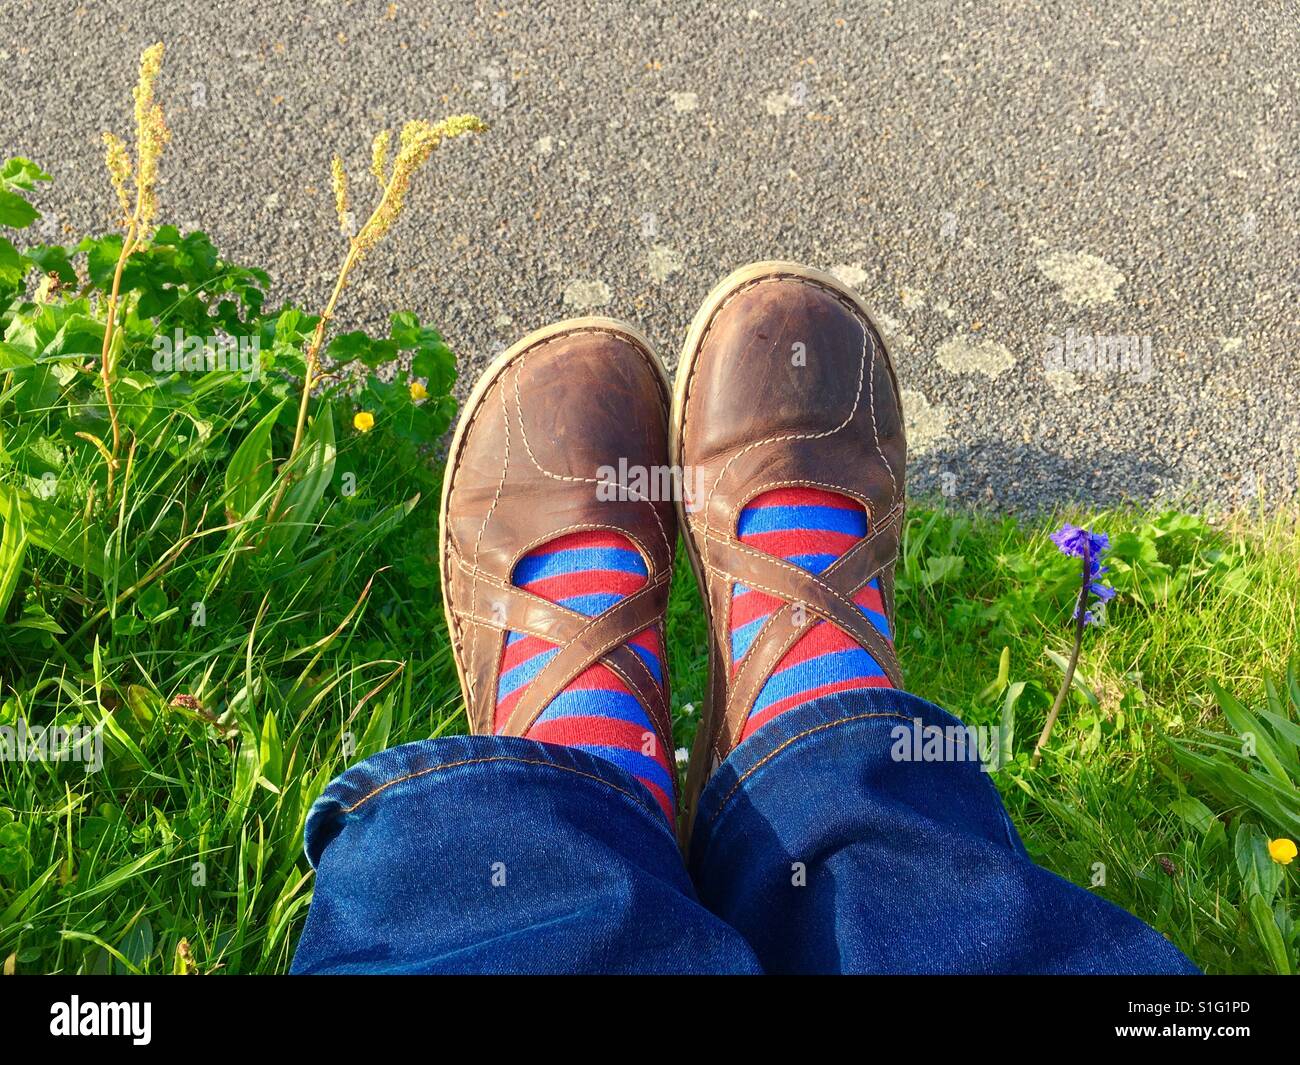 Feet in shoes resting  on grass Stock Photo